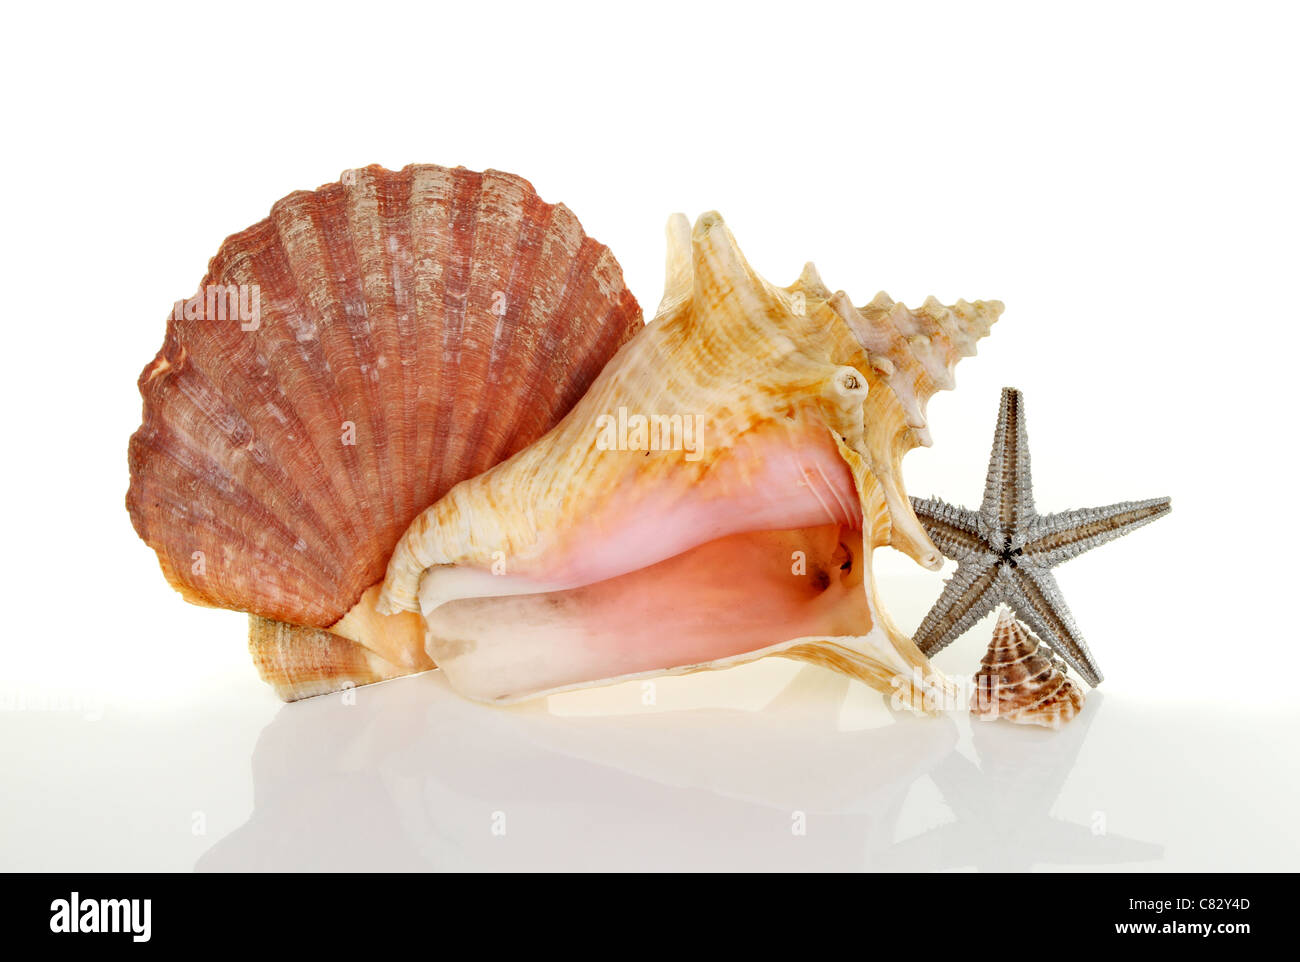 Sea shells and a dried starfish with soft shadows and reflections against a white background Stock Photo